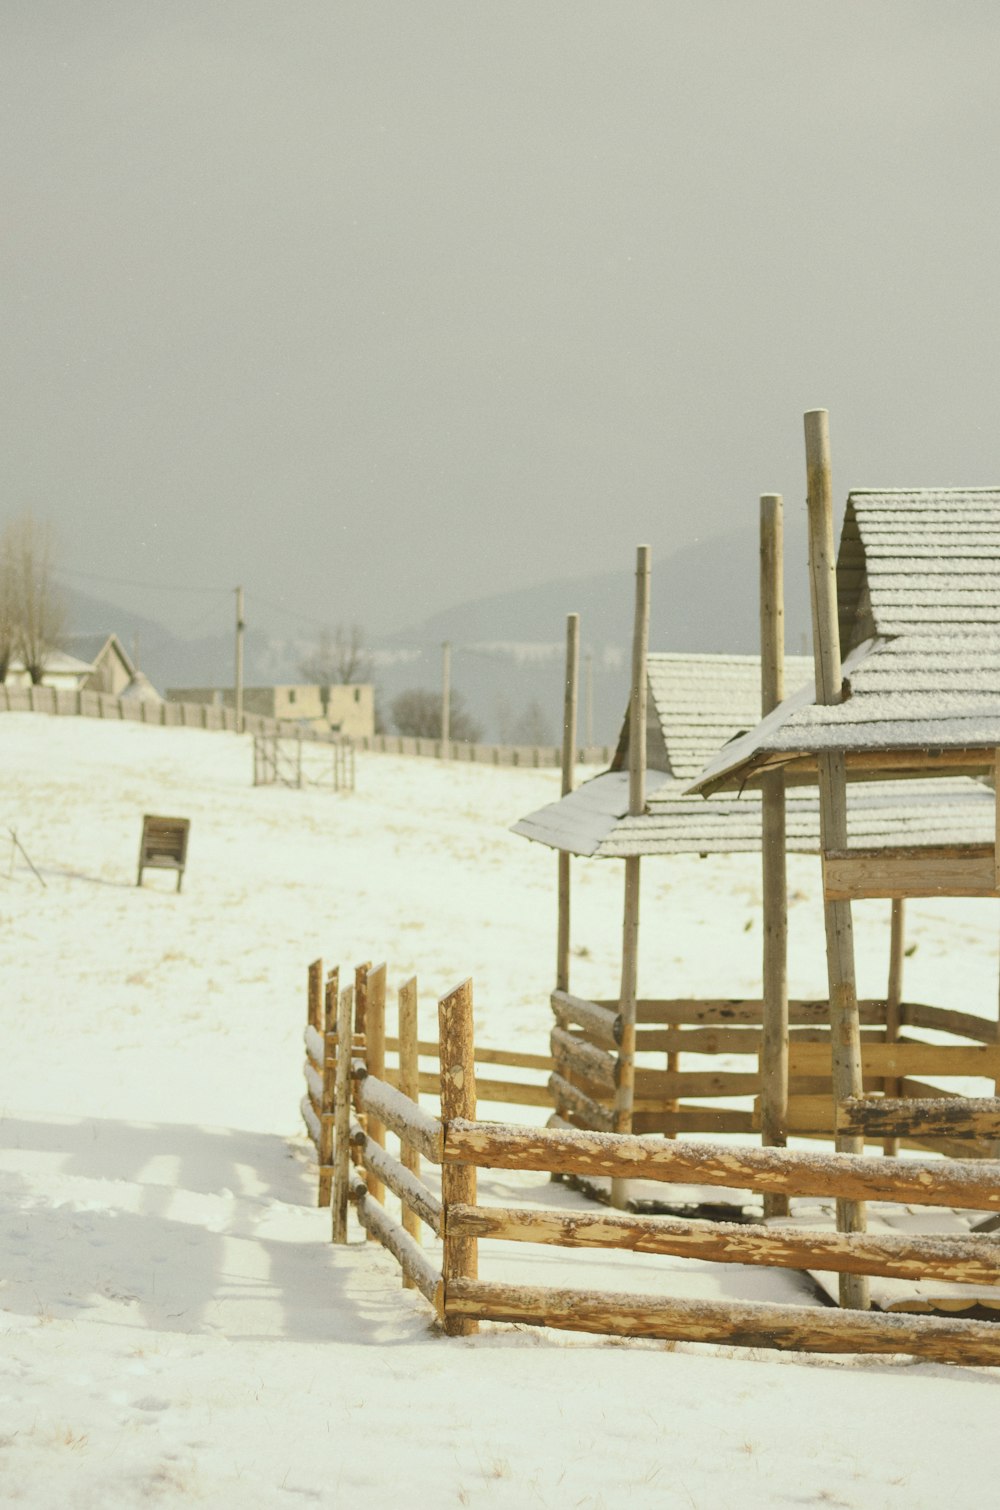 a wooden fence in the snow with a building in the background